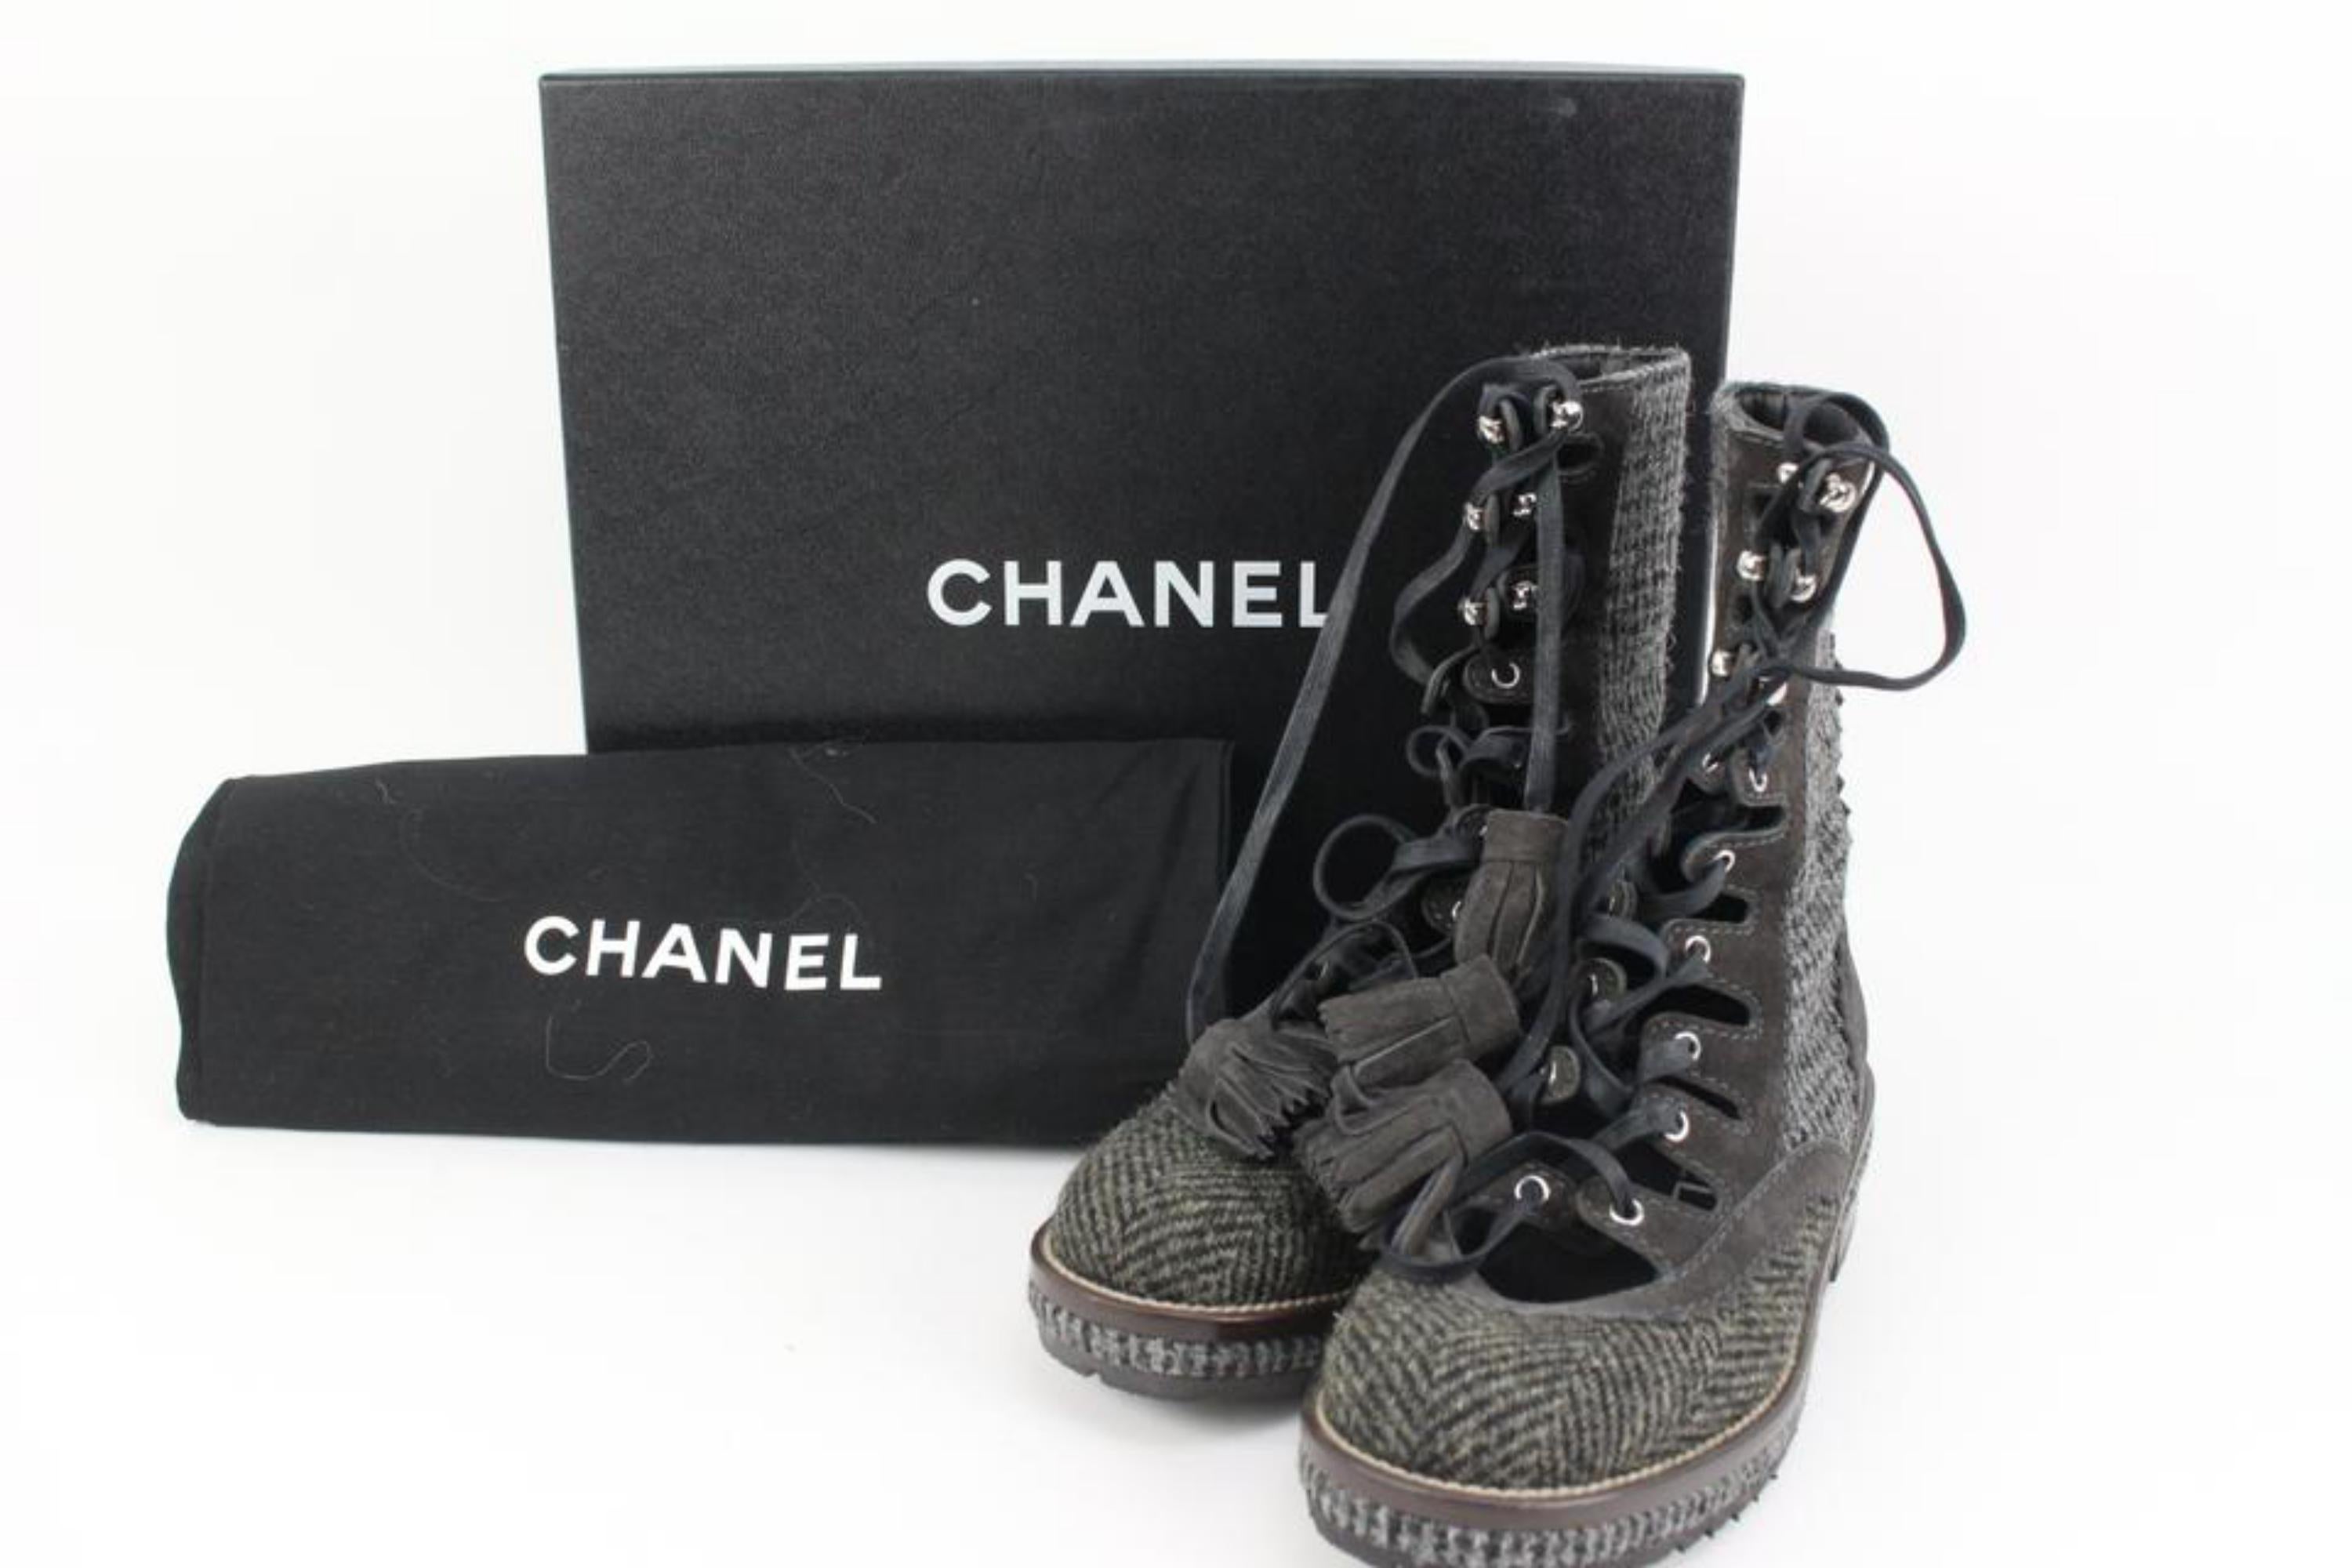 Chanel Size 36 CC Logo Tweed Combat Boots 40cz413s
Date Code/Serial Number: A G29091
Made In: Italy
Measurements: Length:  9.5